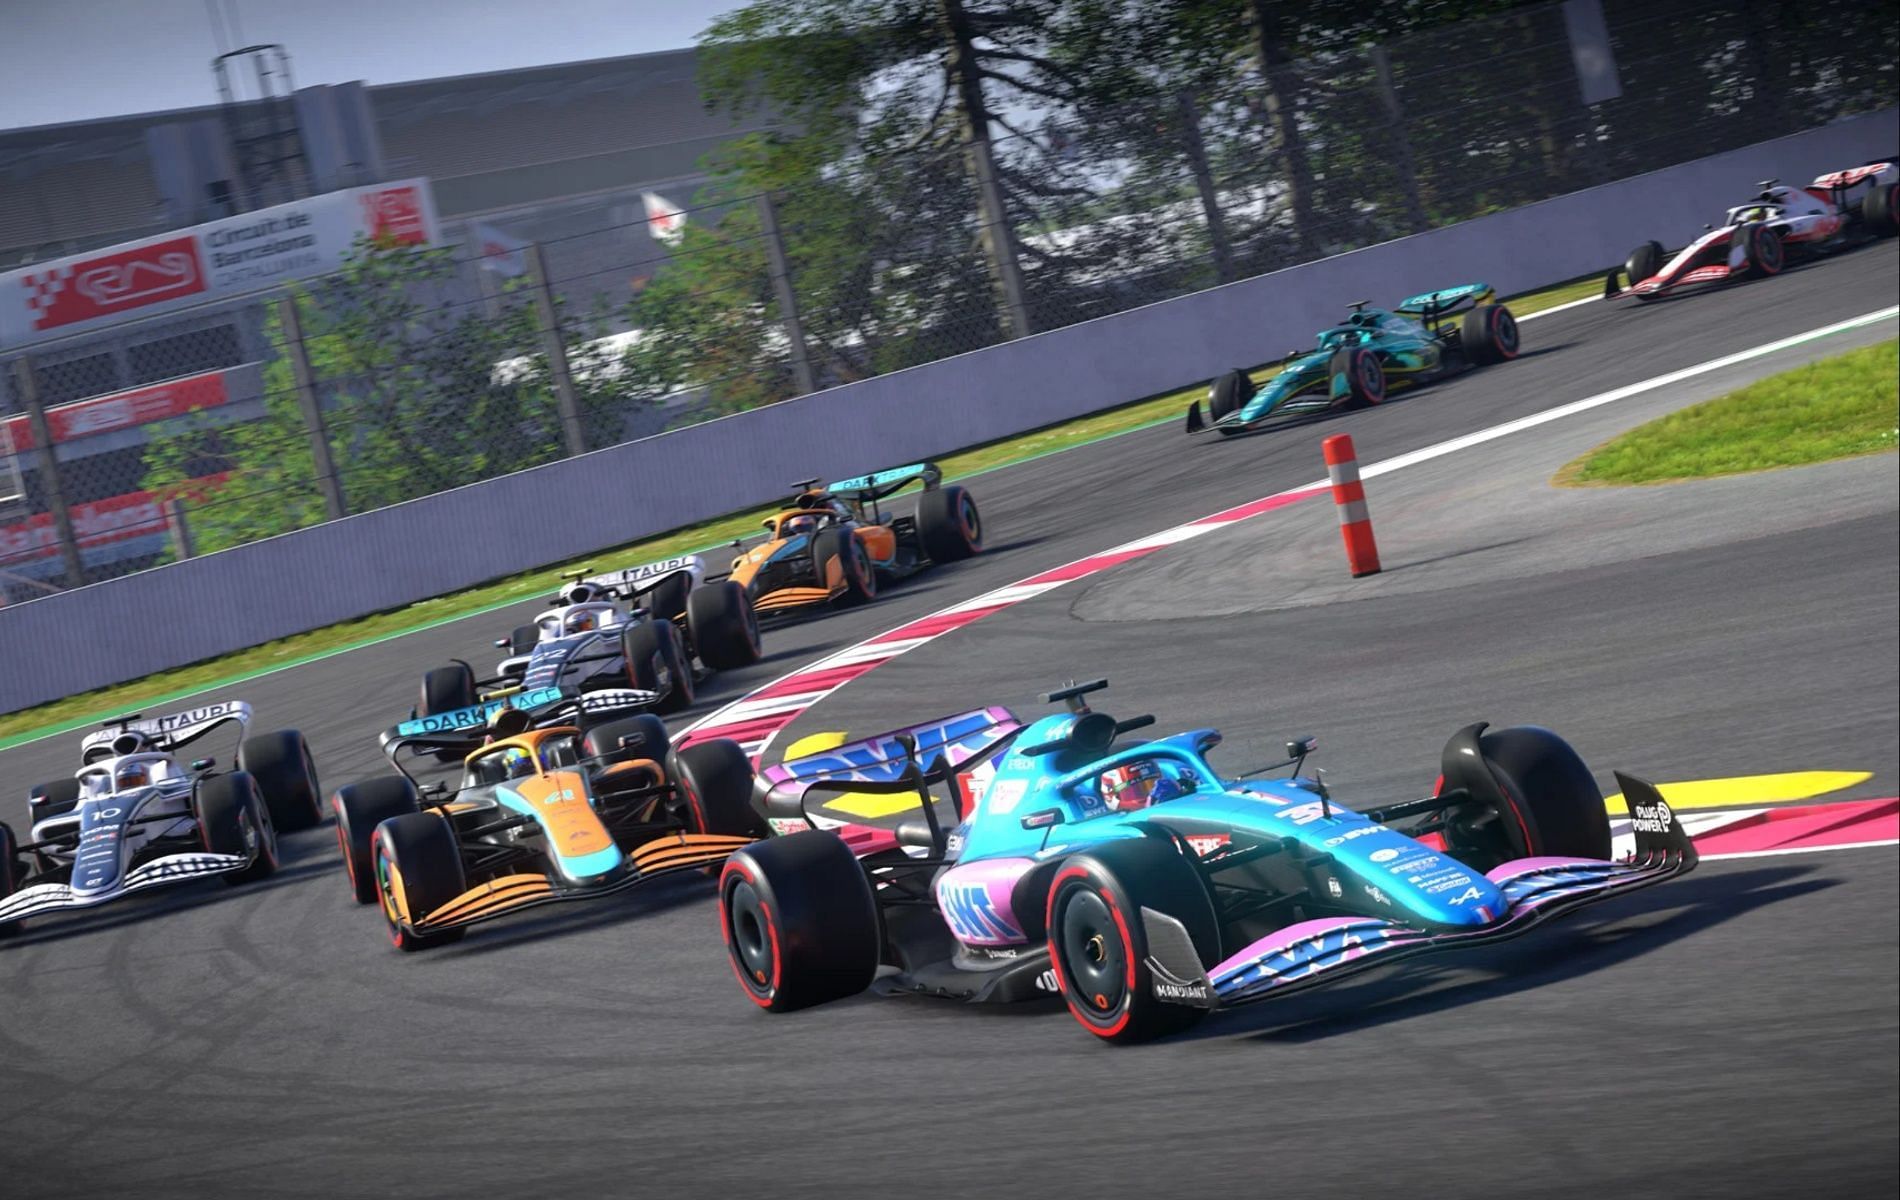 Does F1 23 have crossplay between PlayStation, Xbox, and PC?